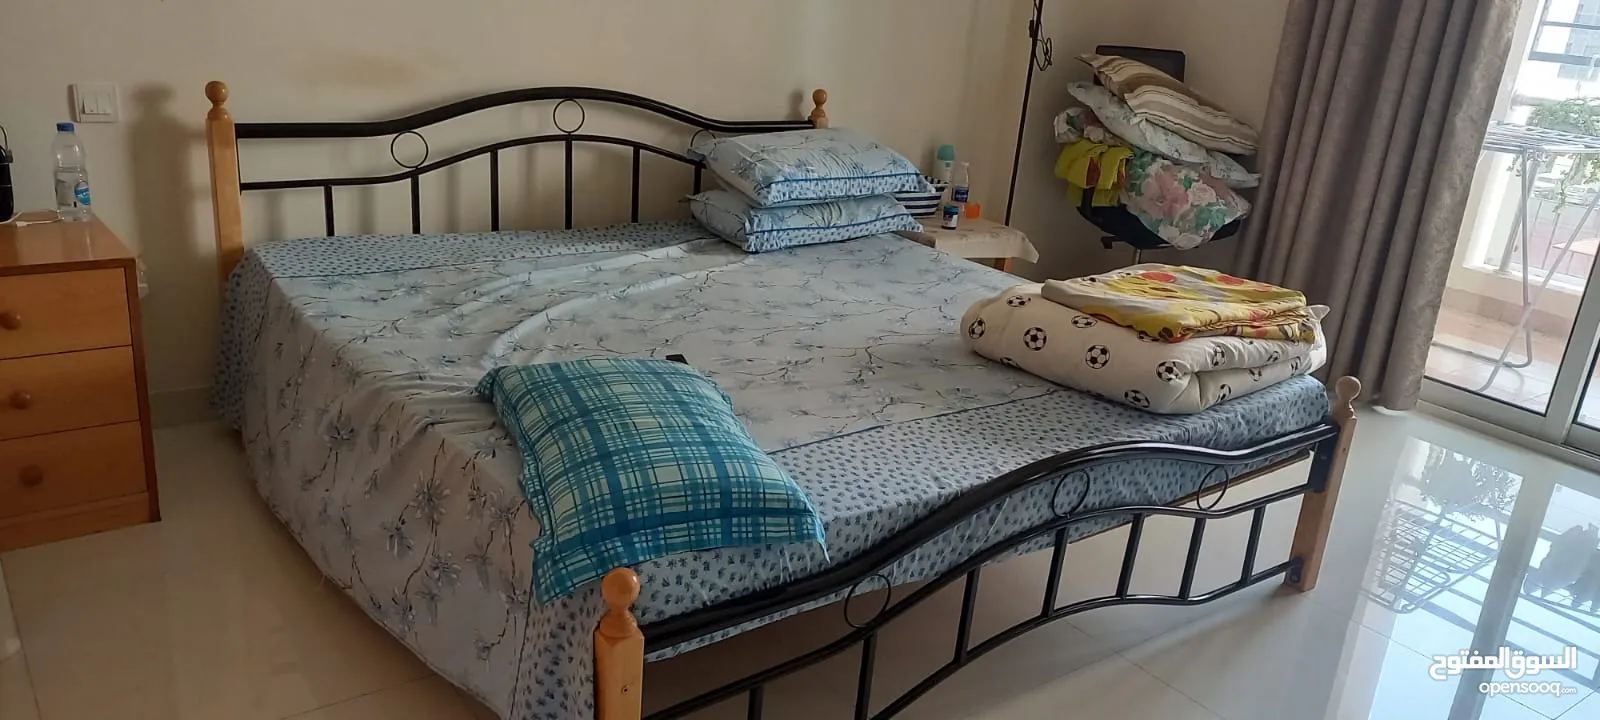 urgent sale king bed with matres and fridge